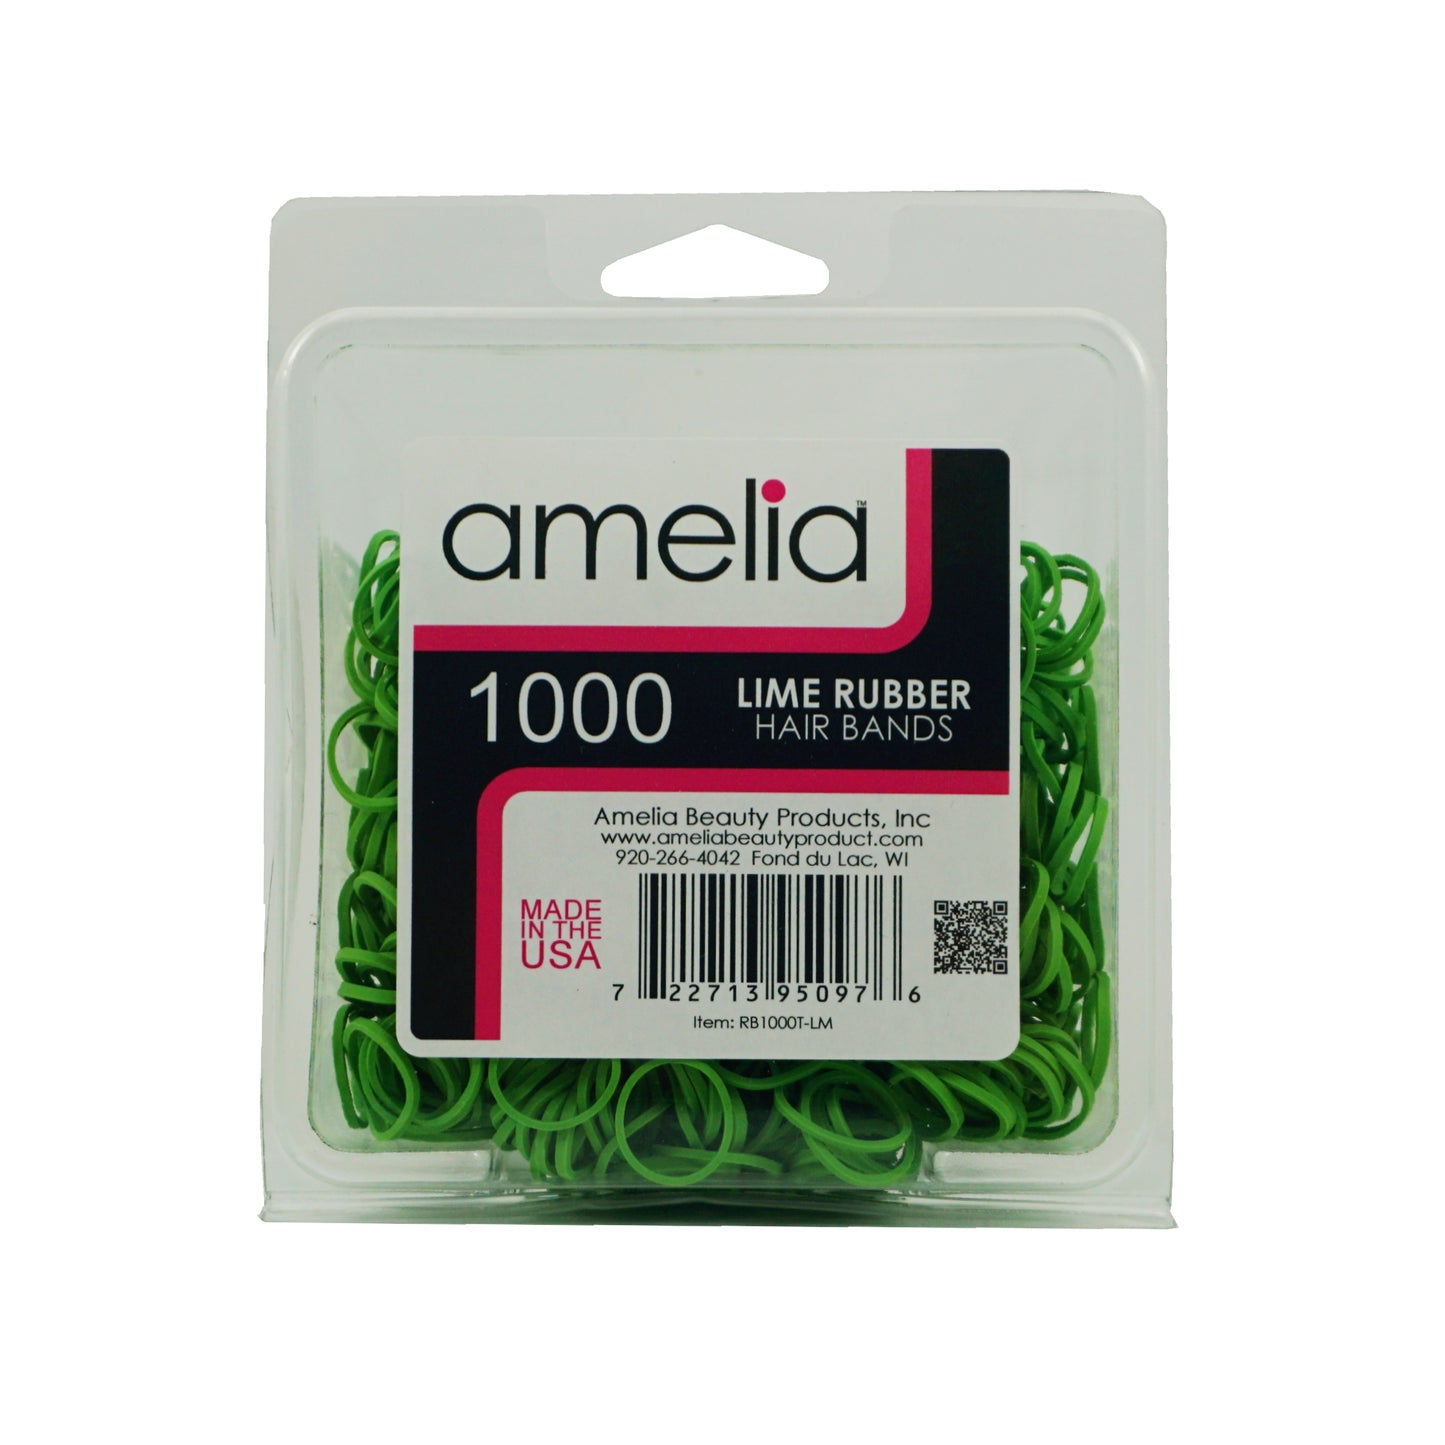 Amelia Beauty | 1/2in, Lime, Elastic Rubber Band Pony Tail Holders | Made in USA, Ideal for Ponytails, Braids, Twists, Dreadlocks, Styling Accessories for Women, Men and Girls | 1000 Pack